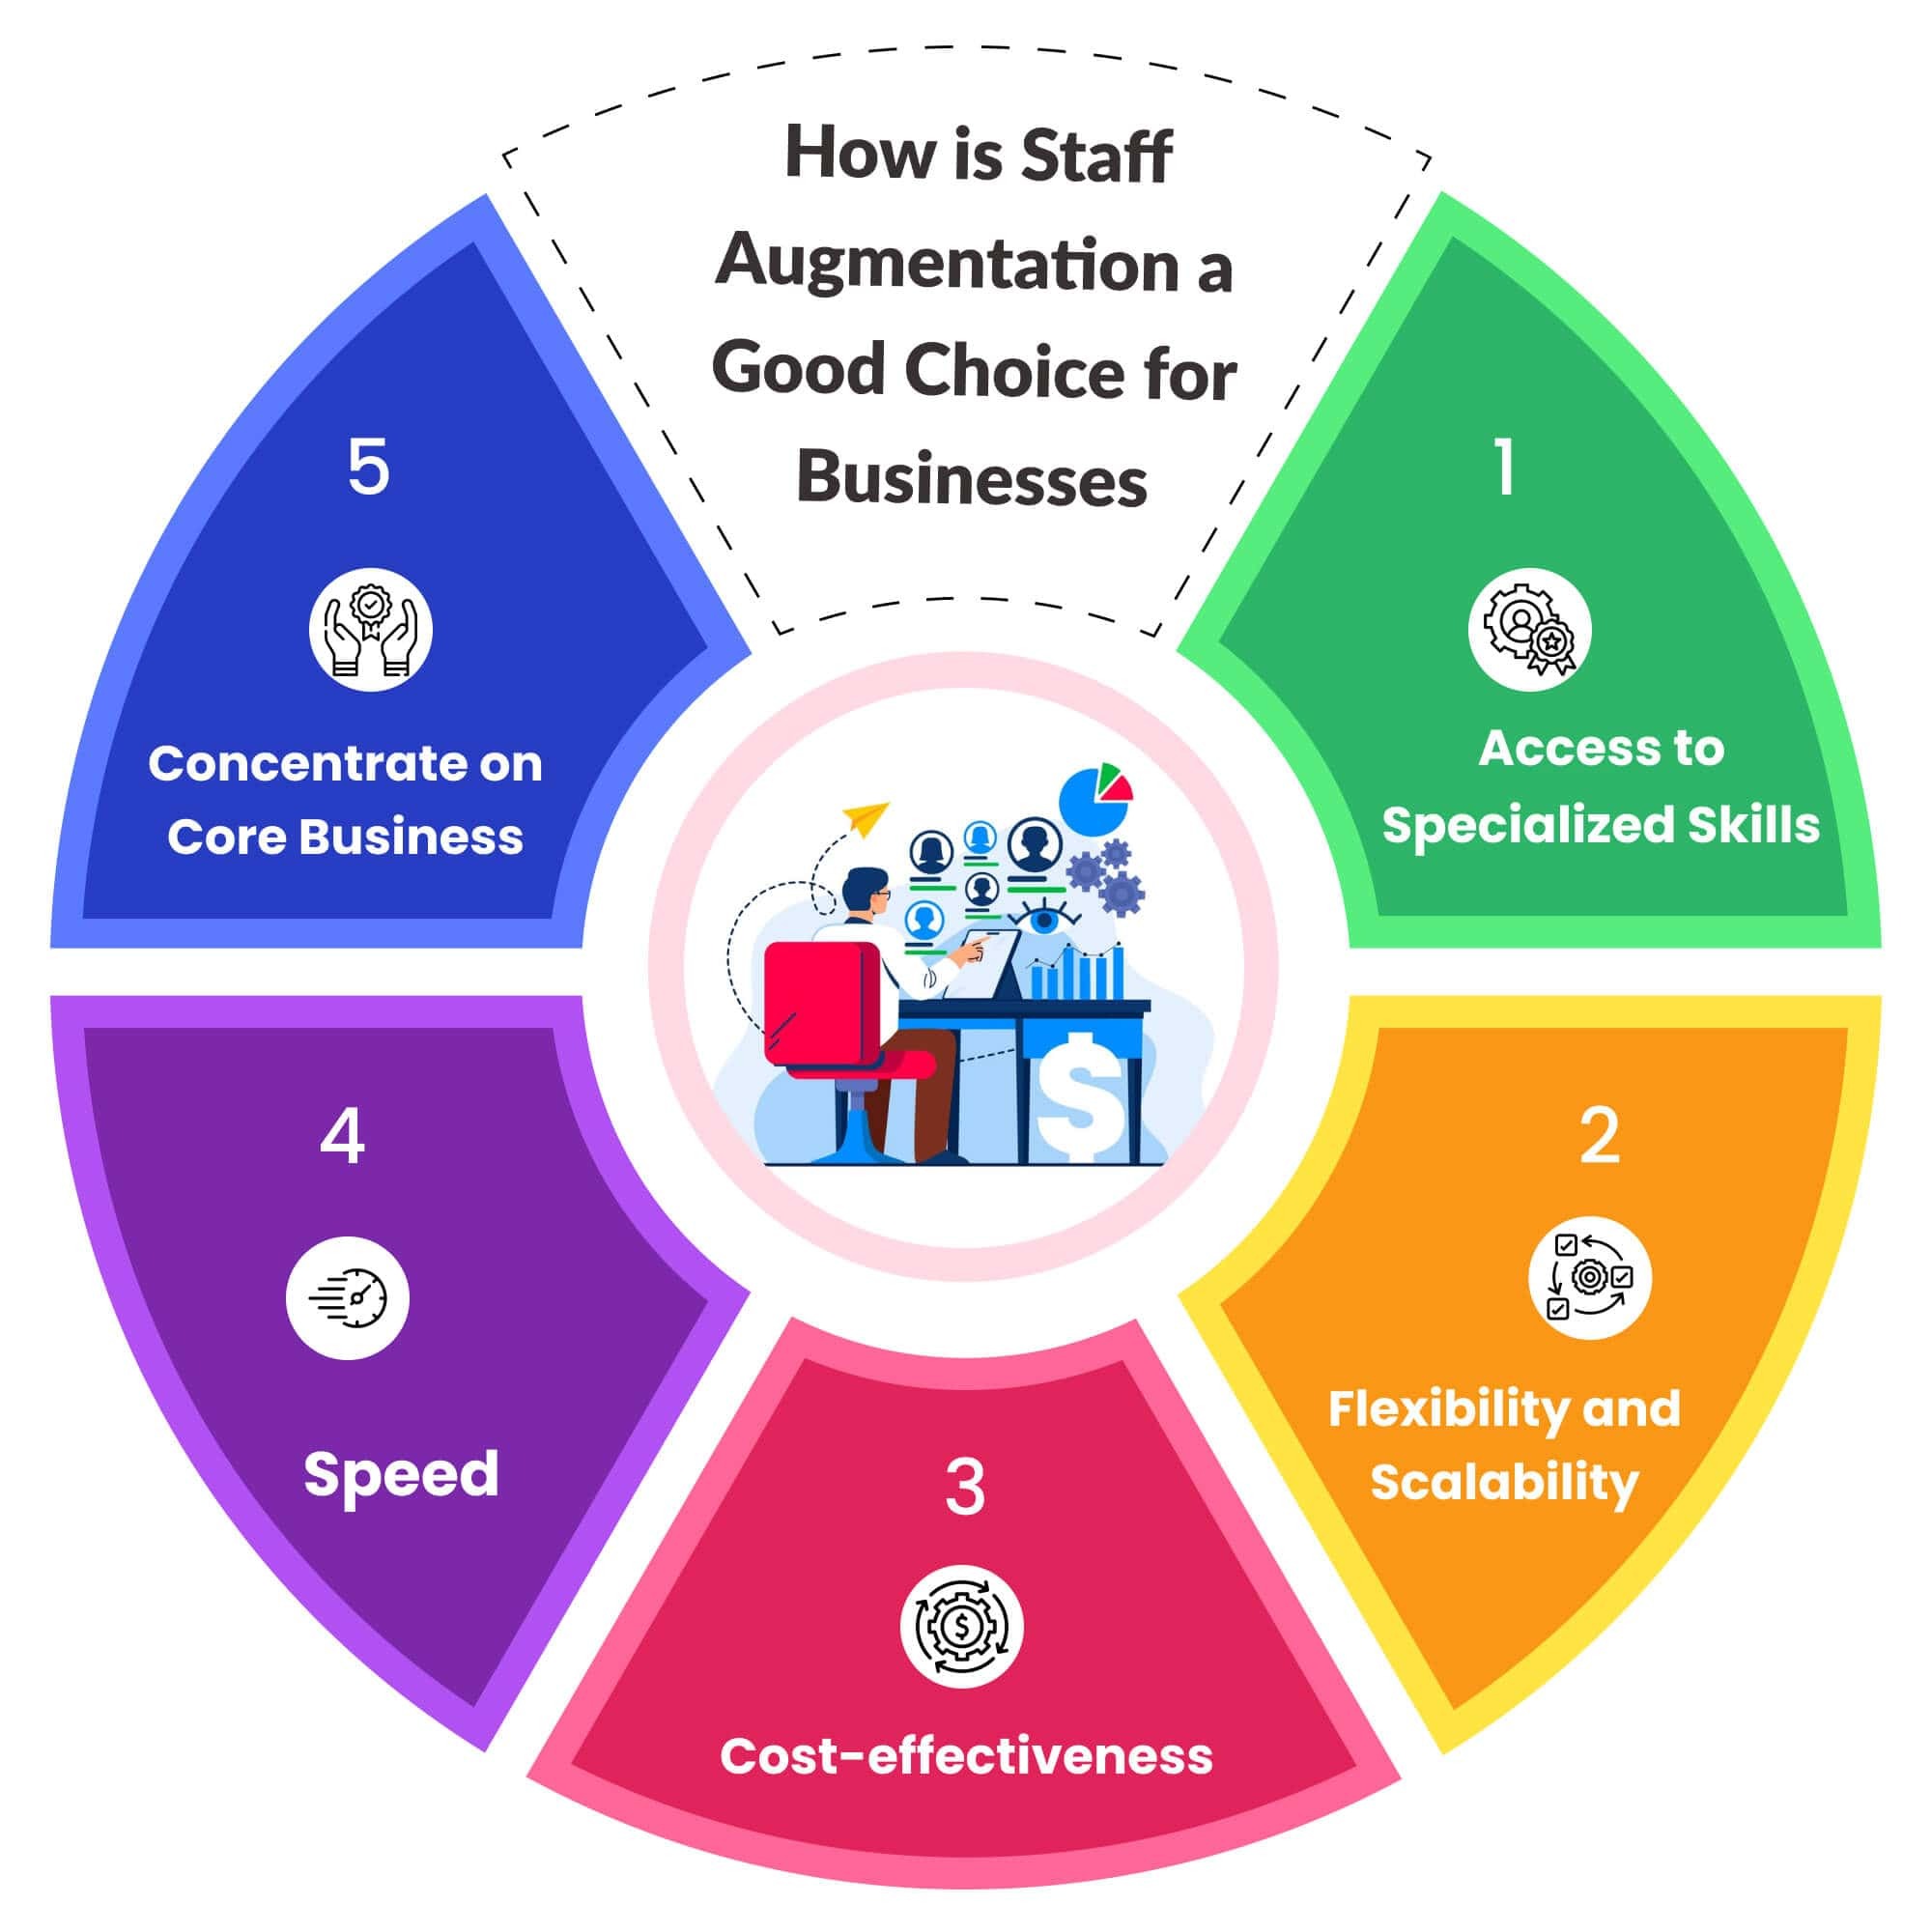 How-is-Staff-Augmentation-a-Good-Choice-for-Businesses